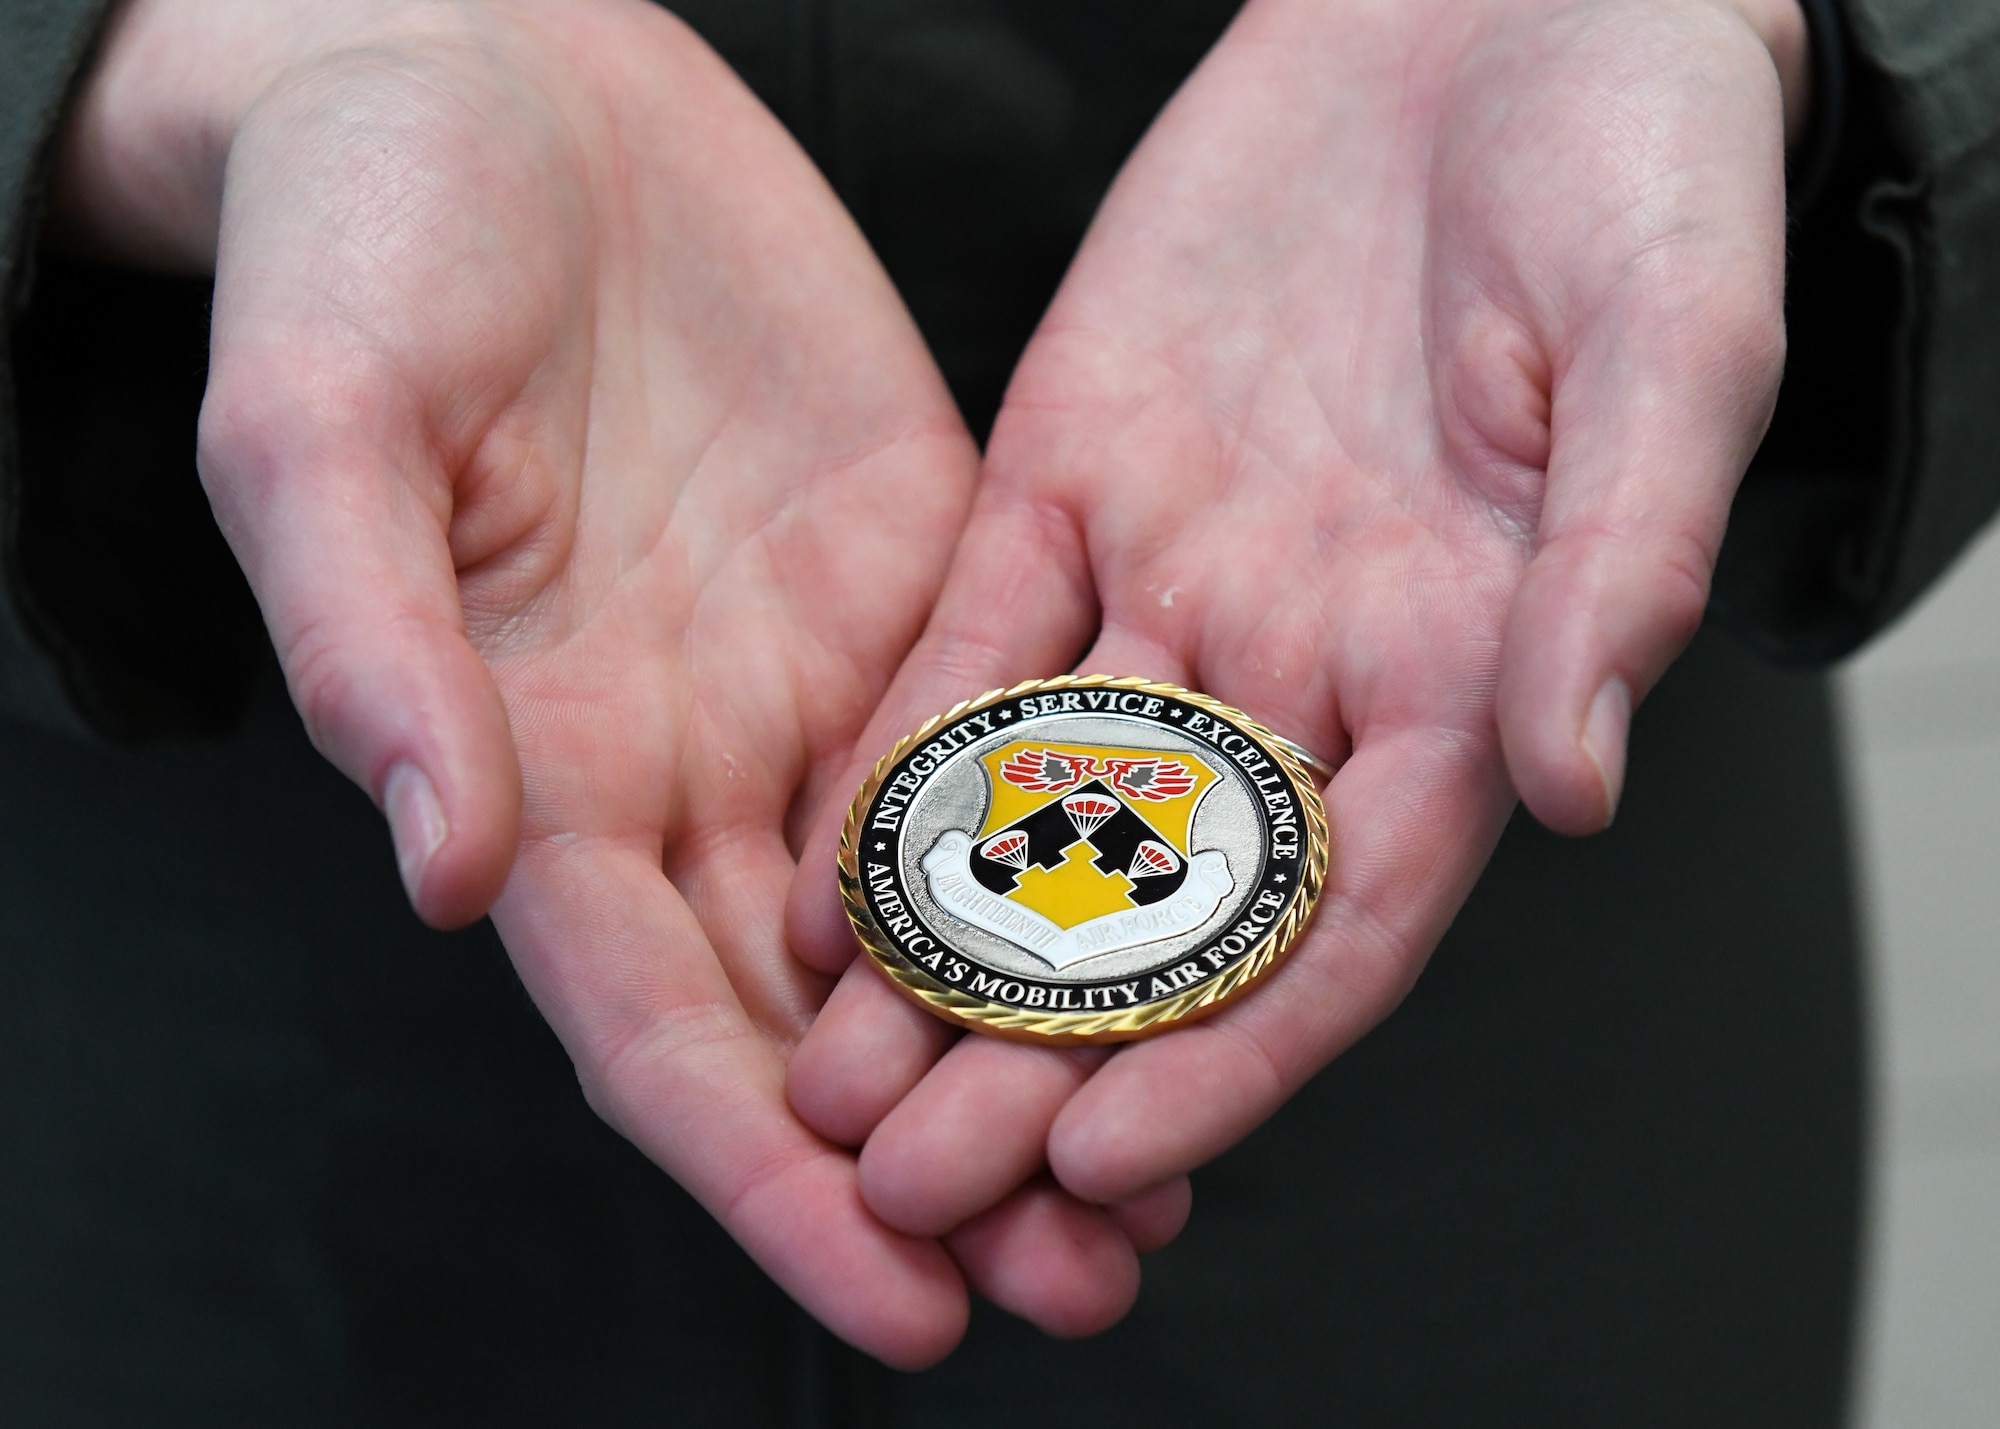 An Airman holds a coin recently given to them by Maj. Gen. Thad Bibb, 18th Air Force commander, during a visit to Fairchild Air Force Base, Washington, May 19-21, 2021.